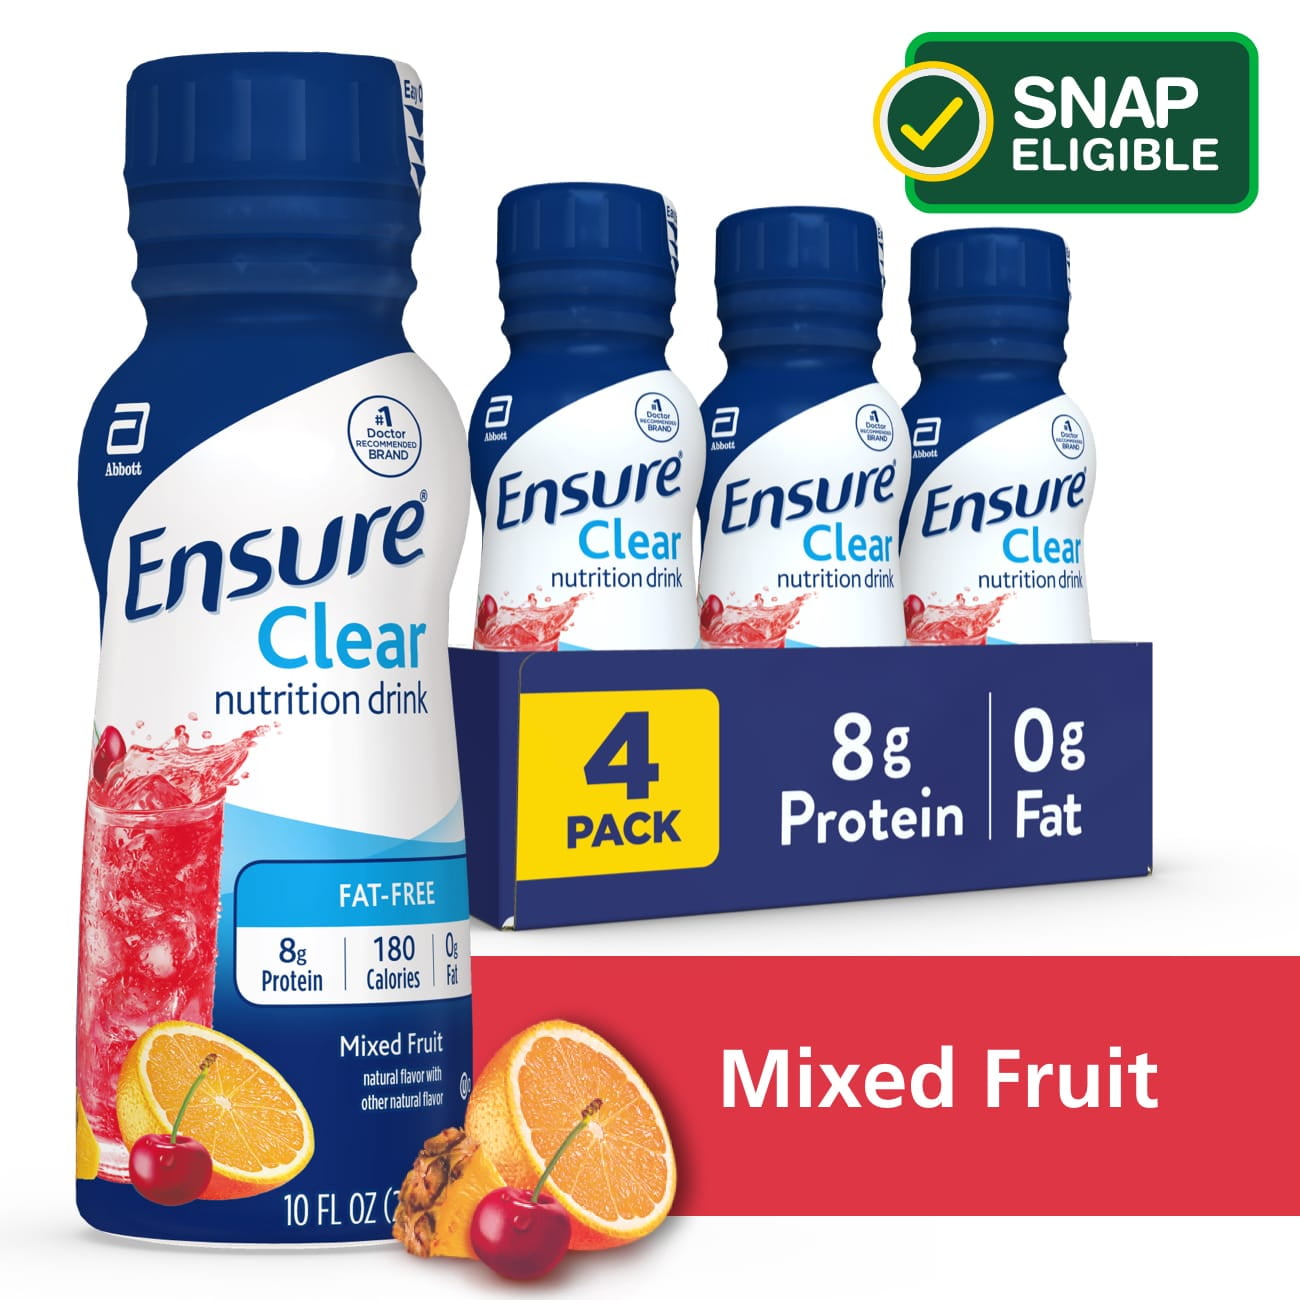 Ensure Clear Nutritional Drink, Fat-Free with 8 Grams High-Quality Protein, Mixed Fruit, 10 fl oz, 4 Count